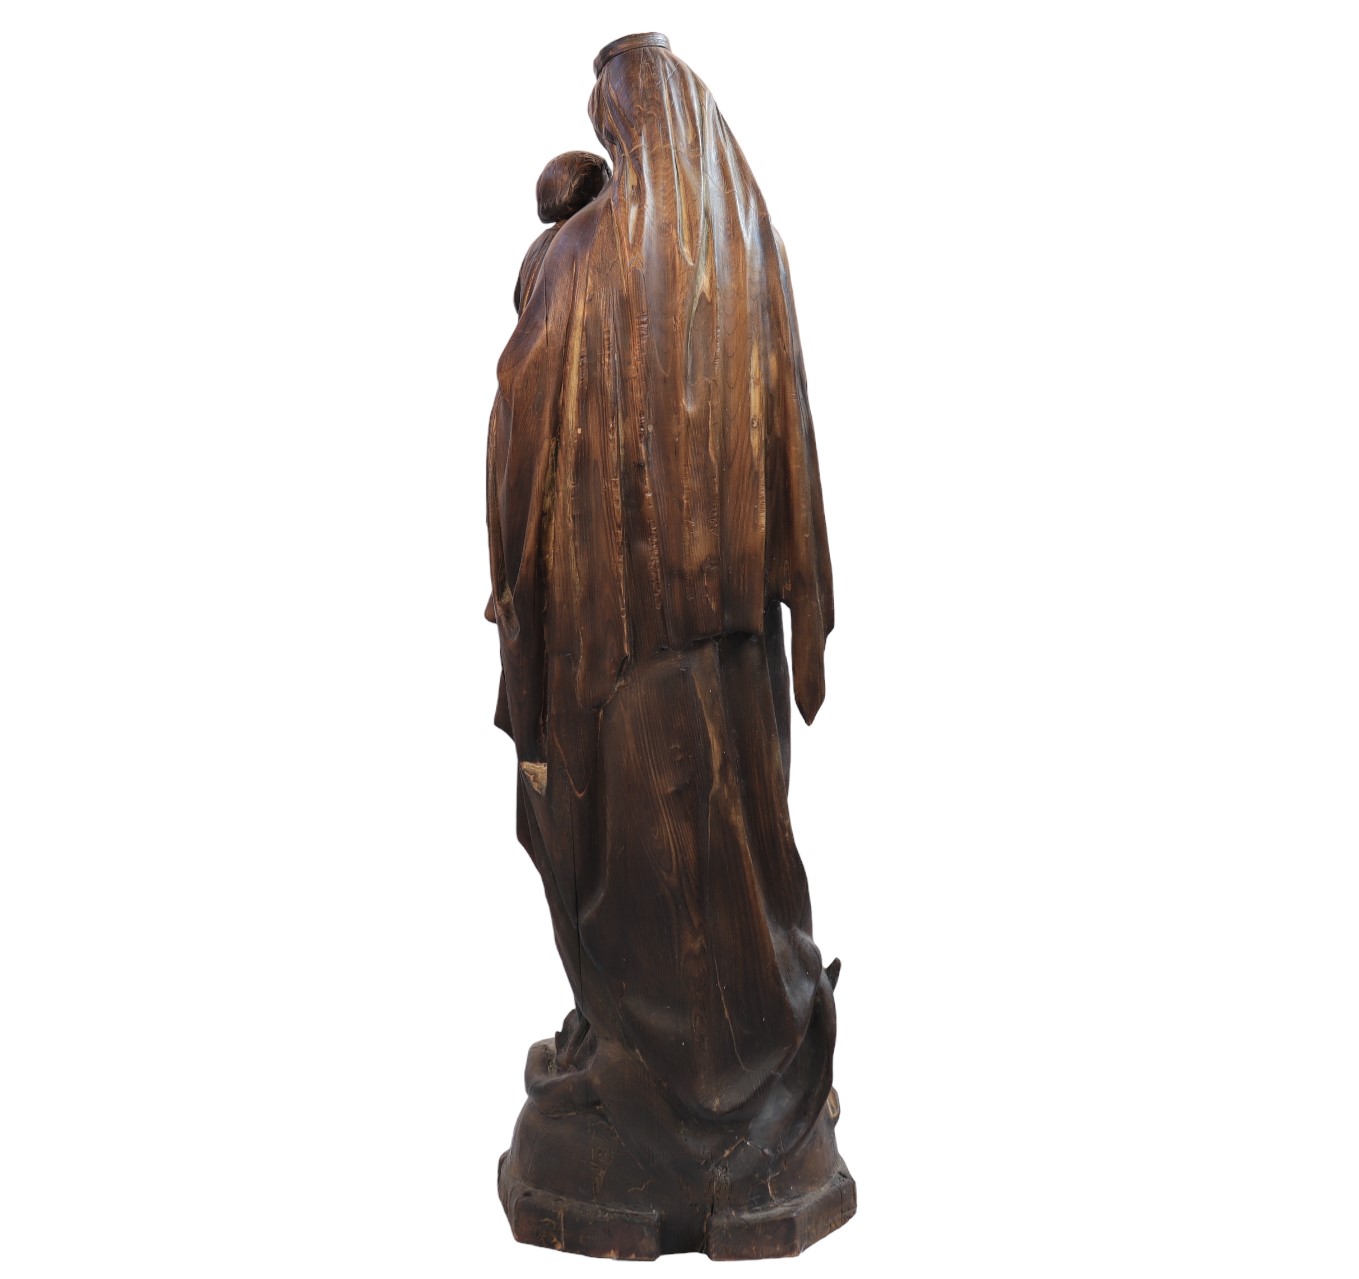 Imposing Virgin and Child in carved wood from 18th century - Image 3 of 5